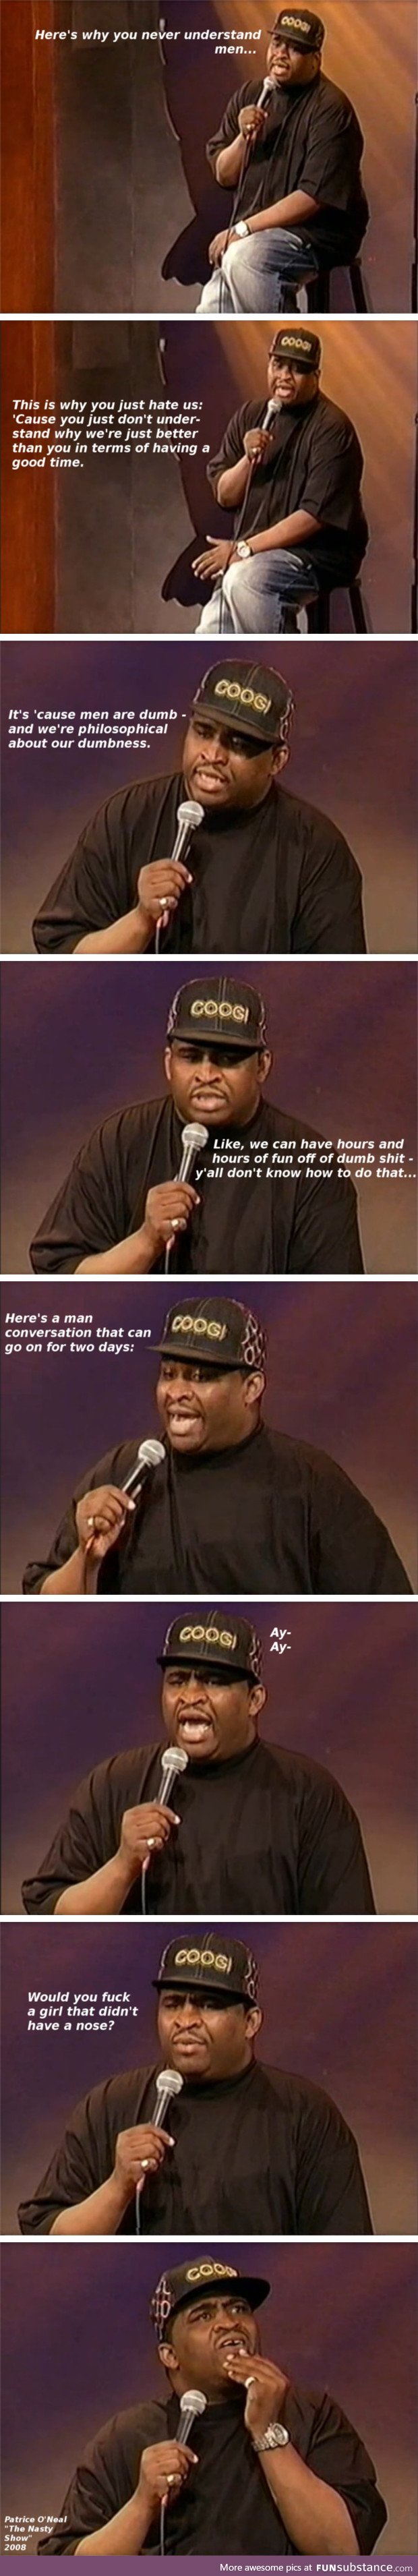 Wisdom about gender from patrice o'neal